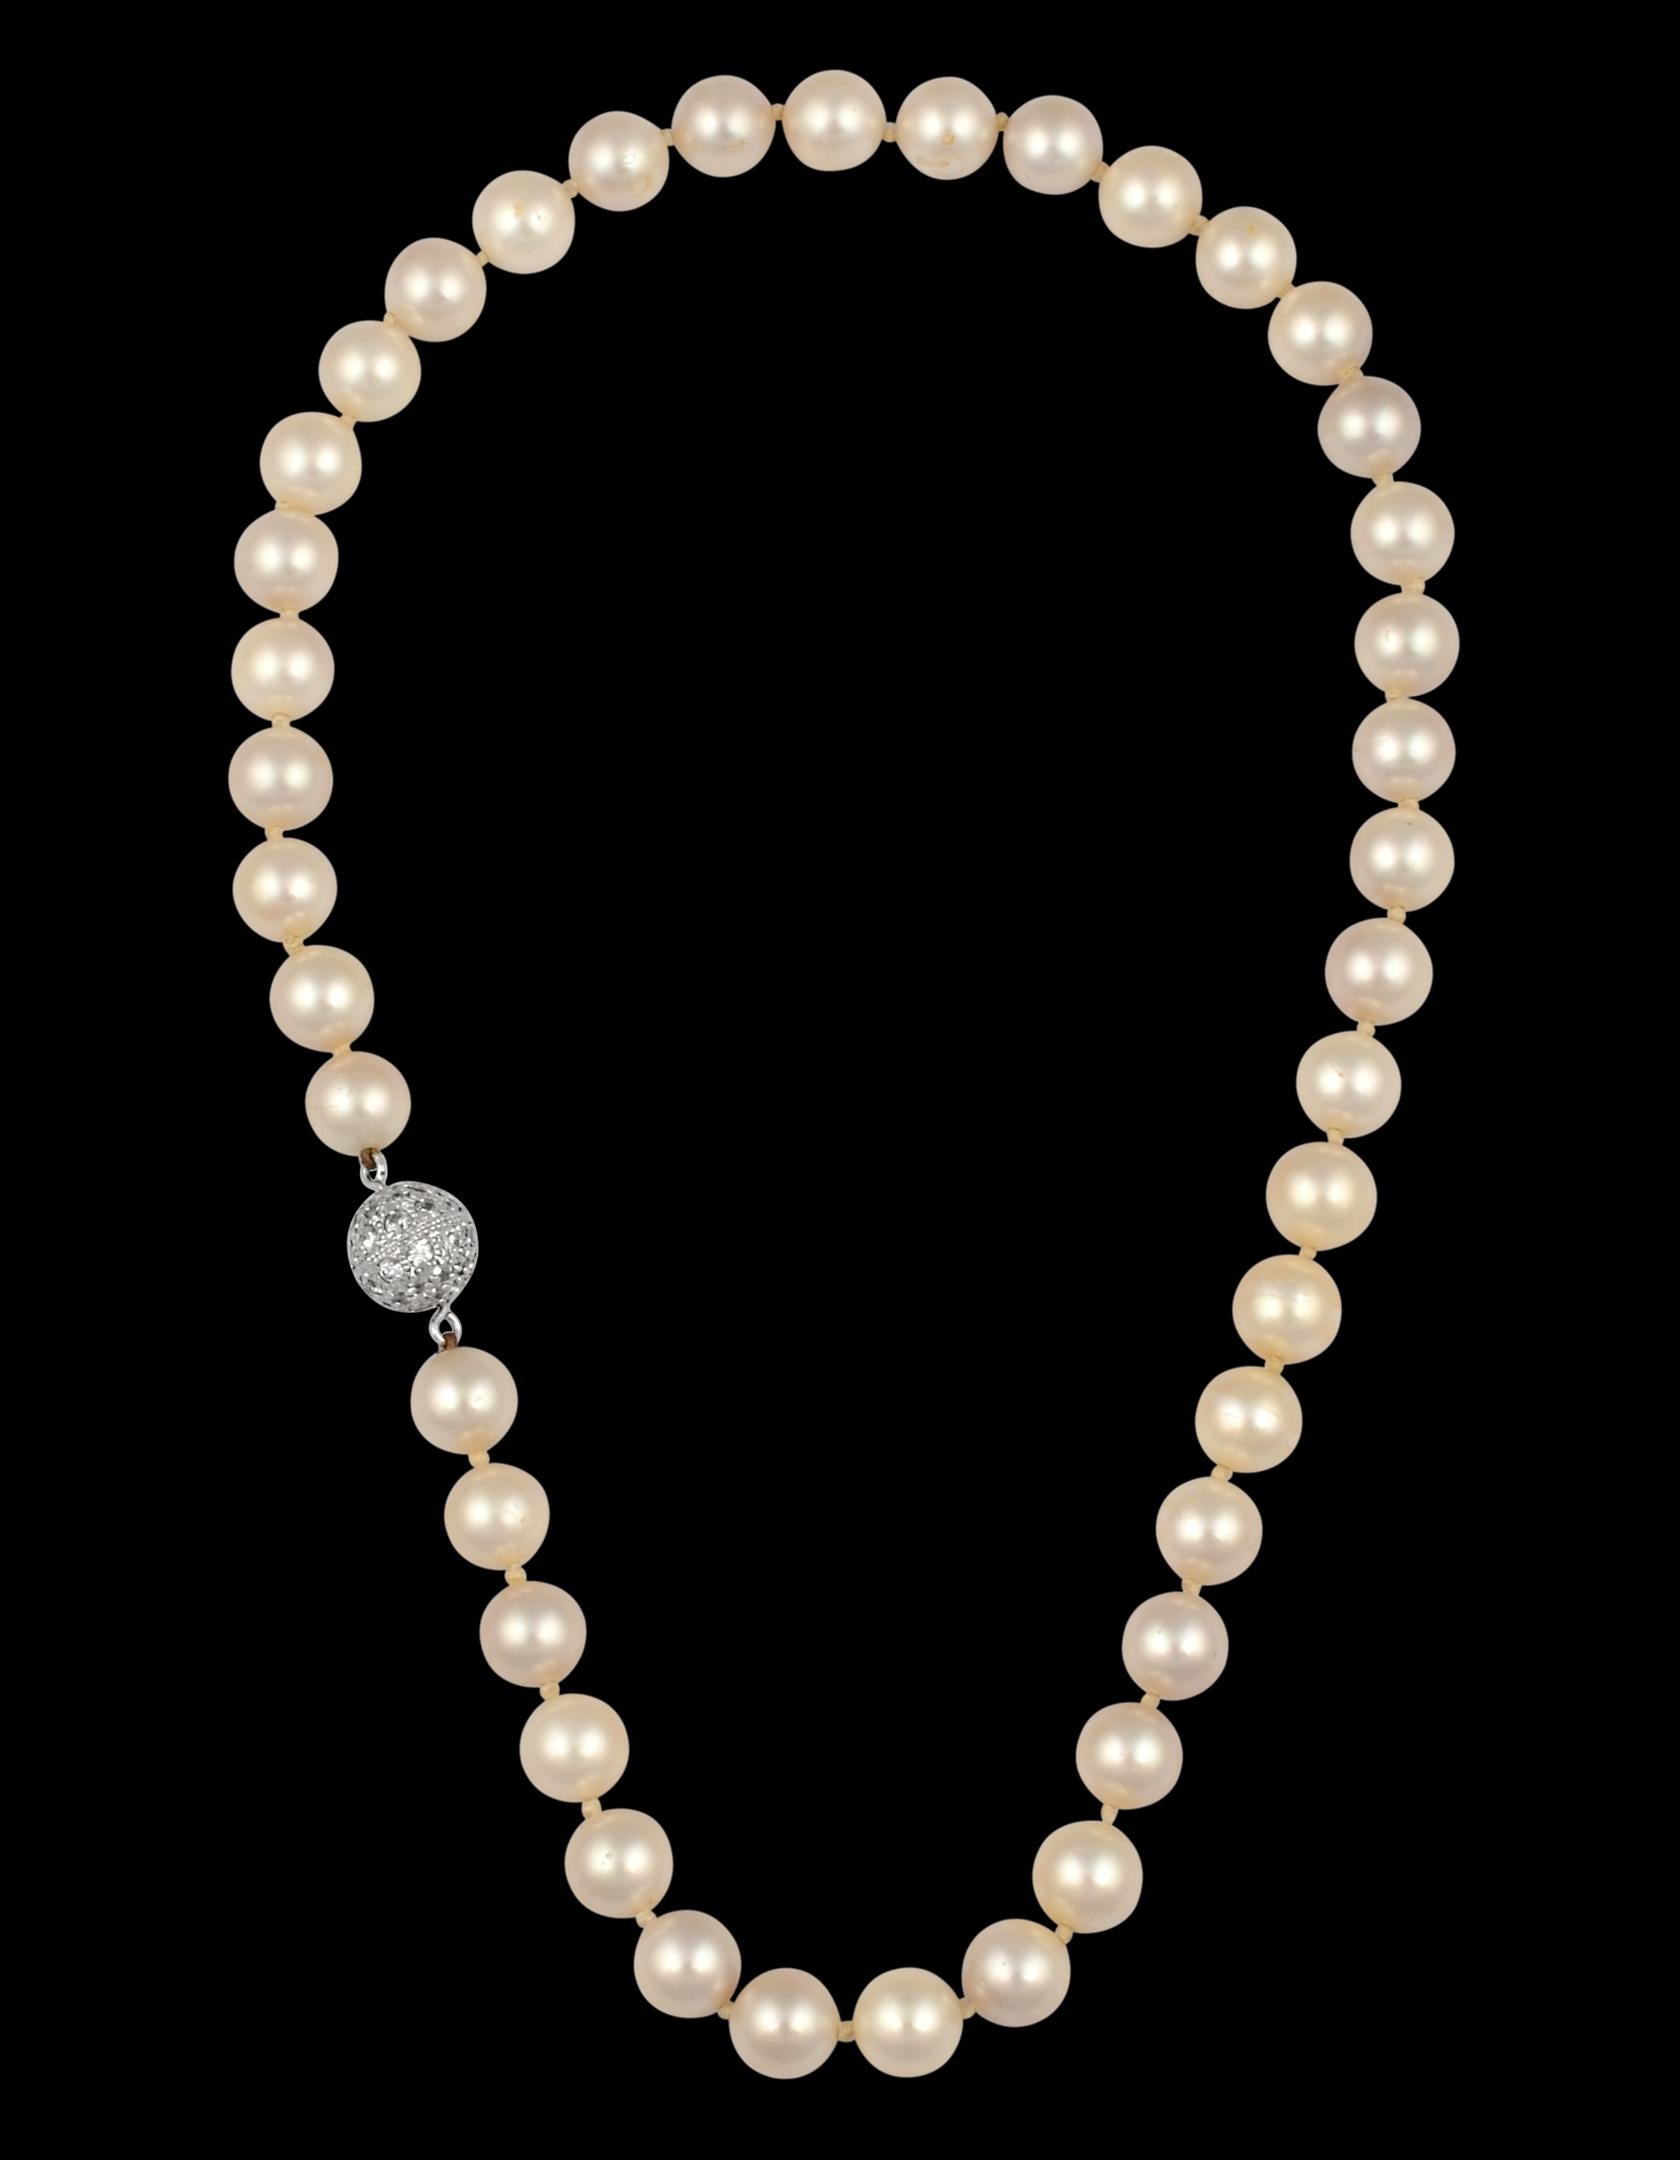 41 Round Akoya Pearls Strand Necklace Set in Metal Ball Clasp For Sale 10